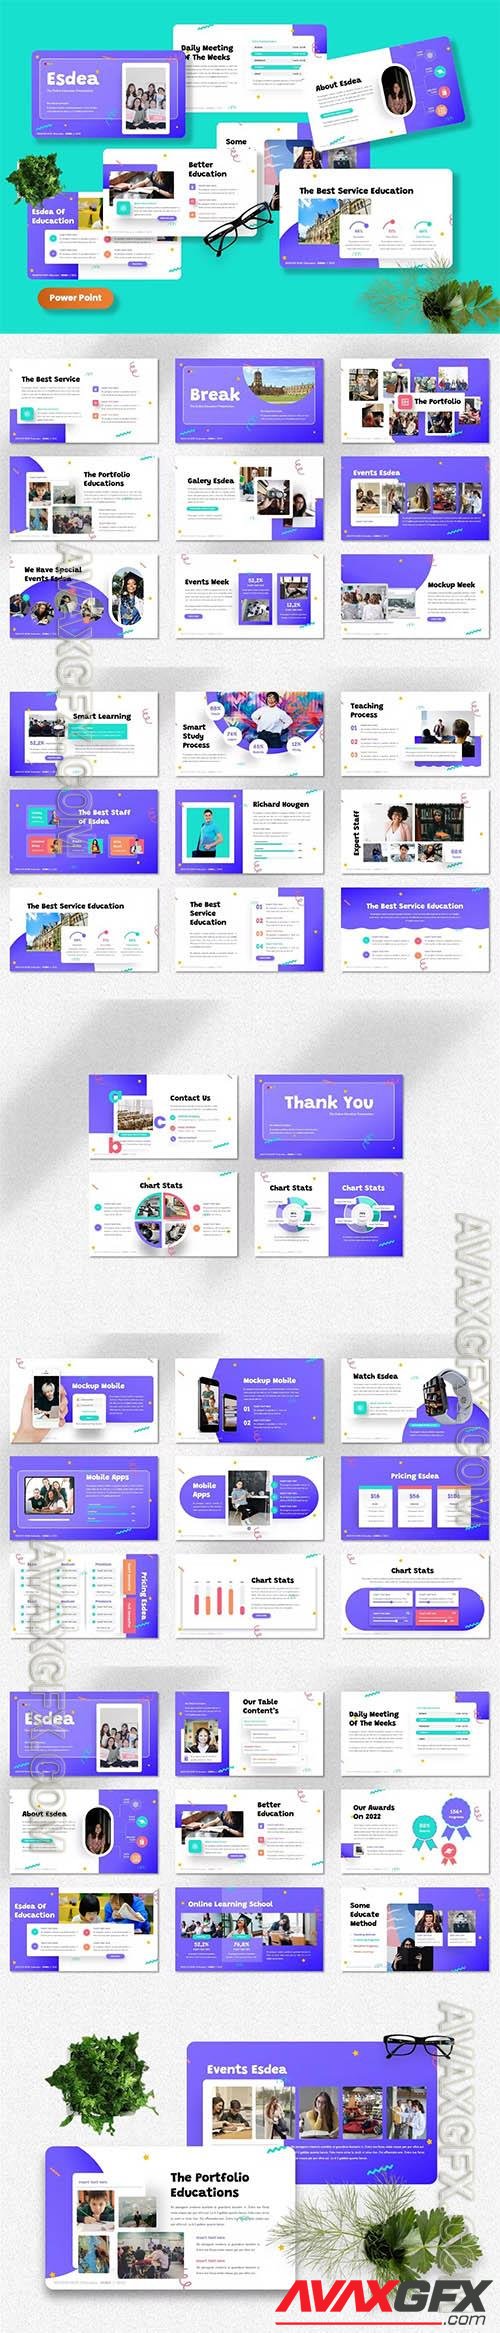 Esdea - Education Creative Business Powerpoint, Keynote and Google Slides Template